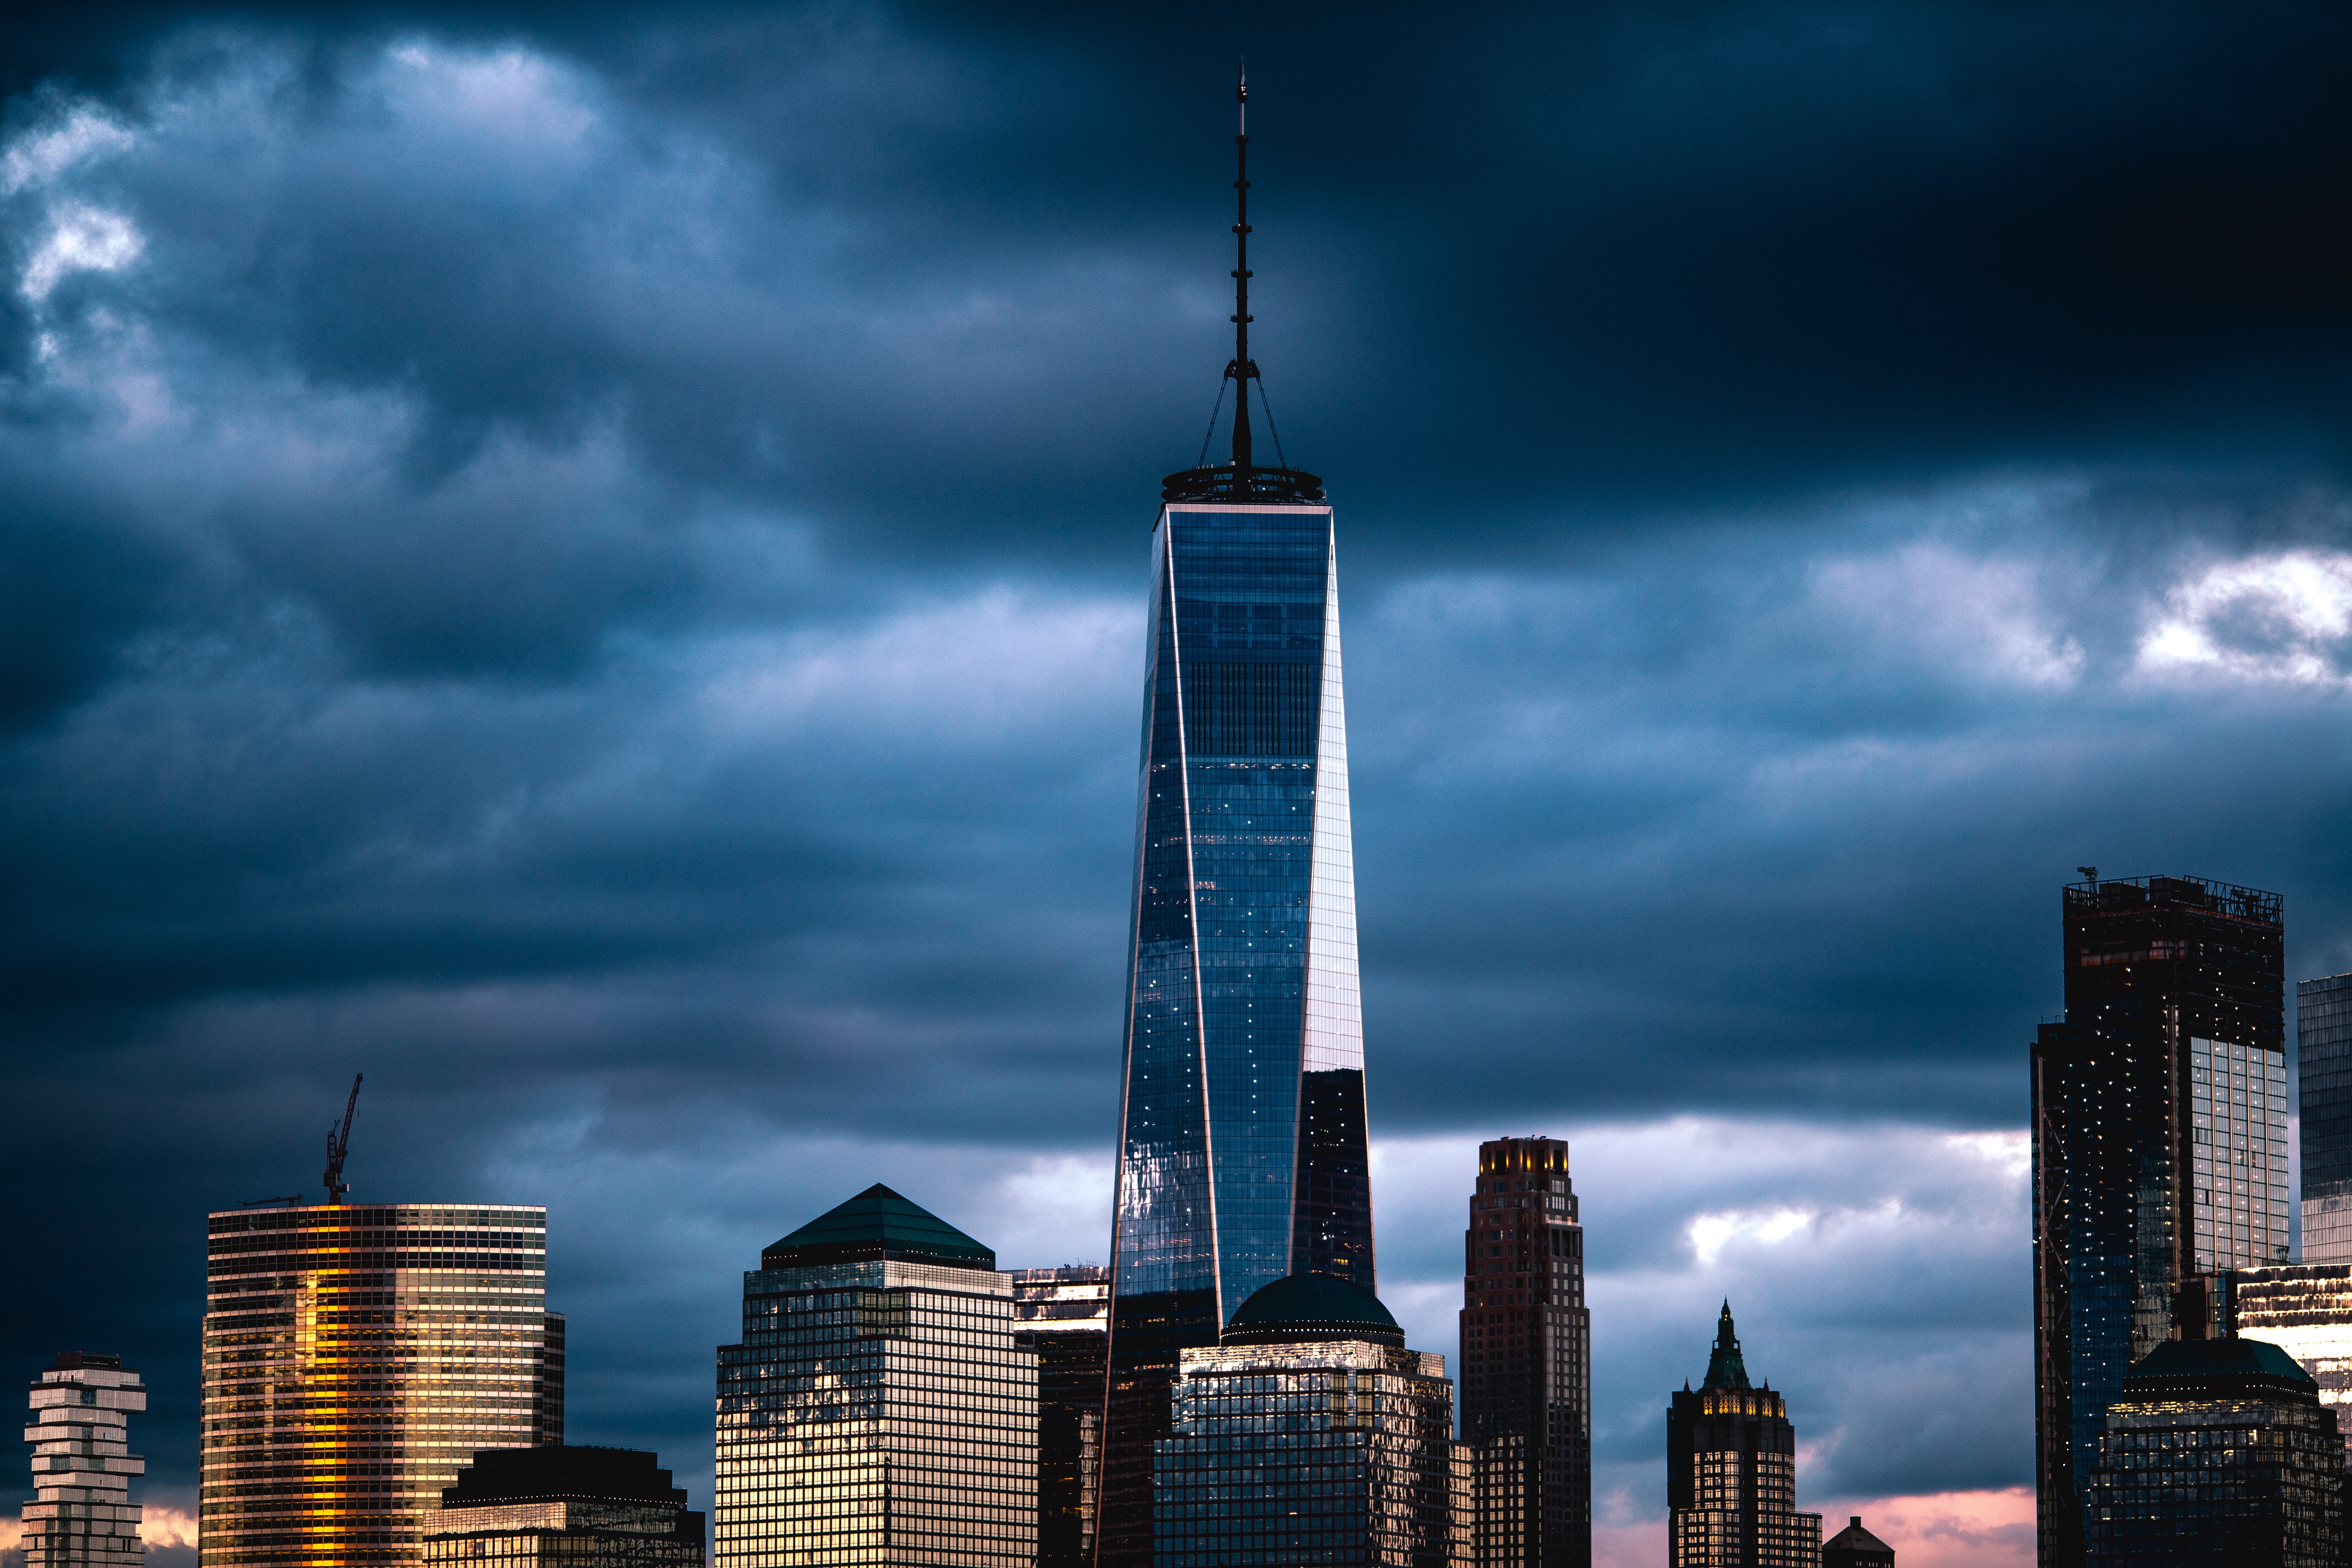 123986 download wallpaper cities, clouds, usa, skyscraper, united states, mainly cloudy, overcast, new york screensavers and pictures for free